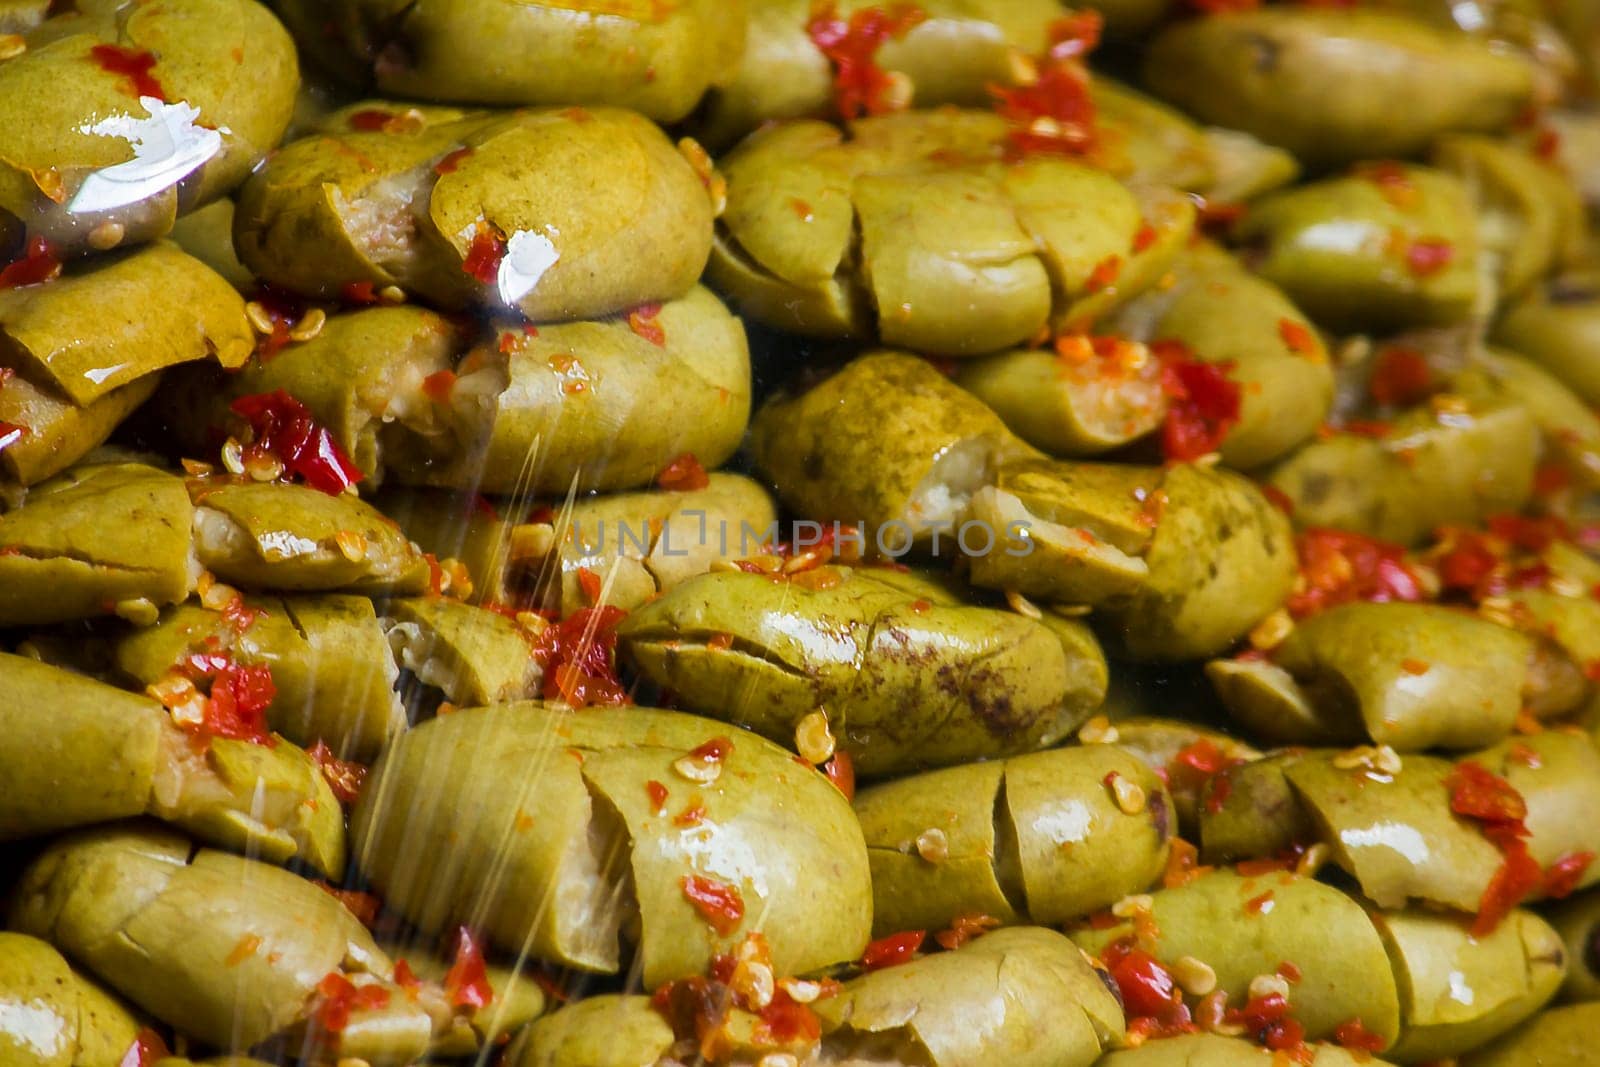 Crystallized olive, use olive water to pickle and then crystallize it to be delicious.